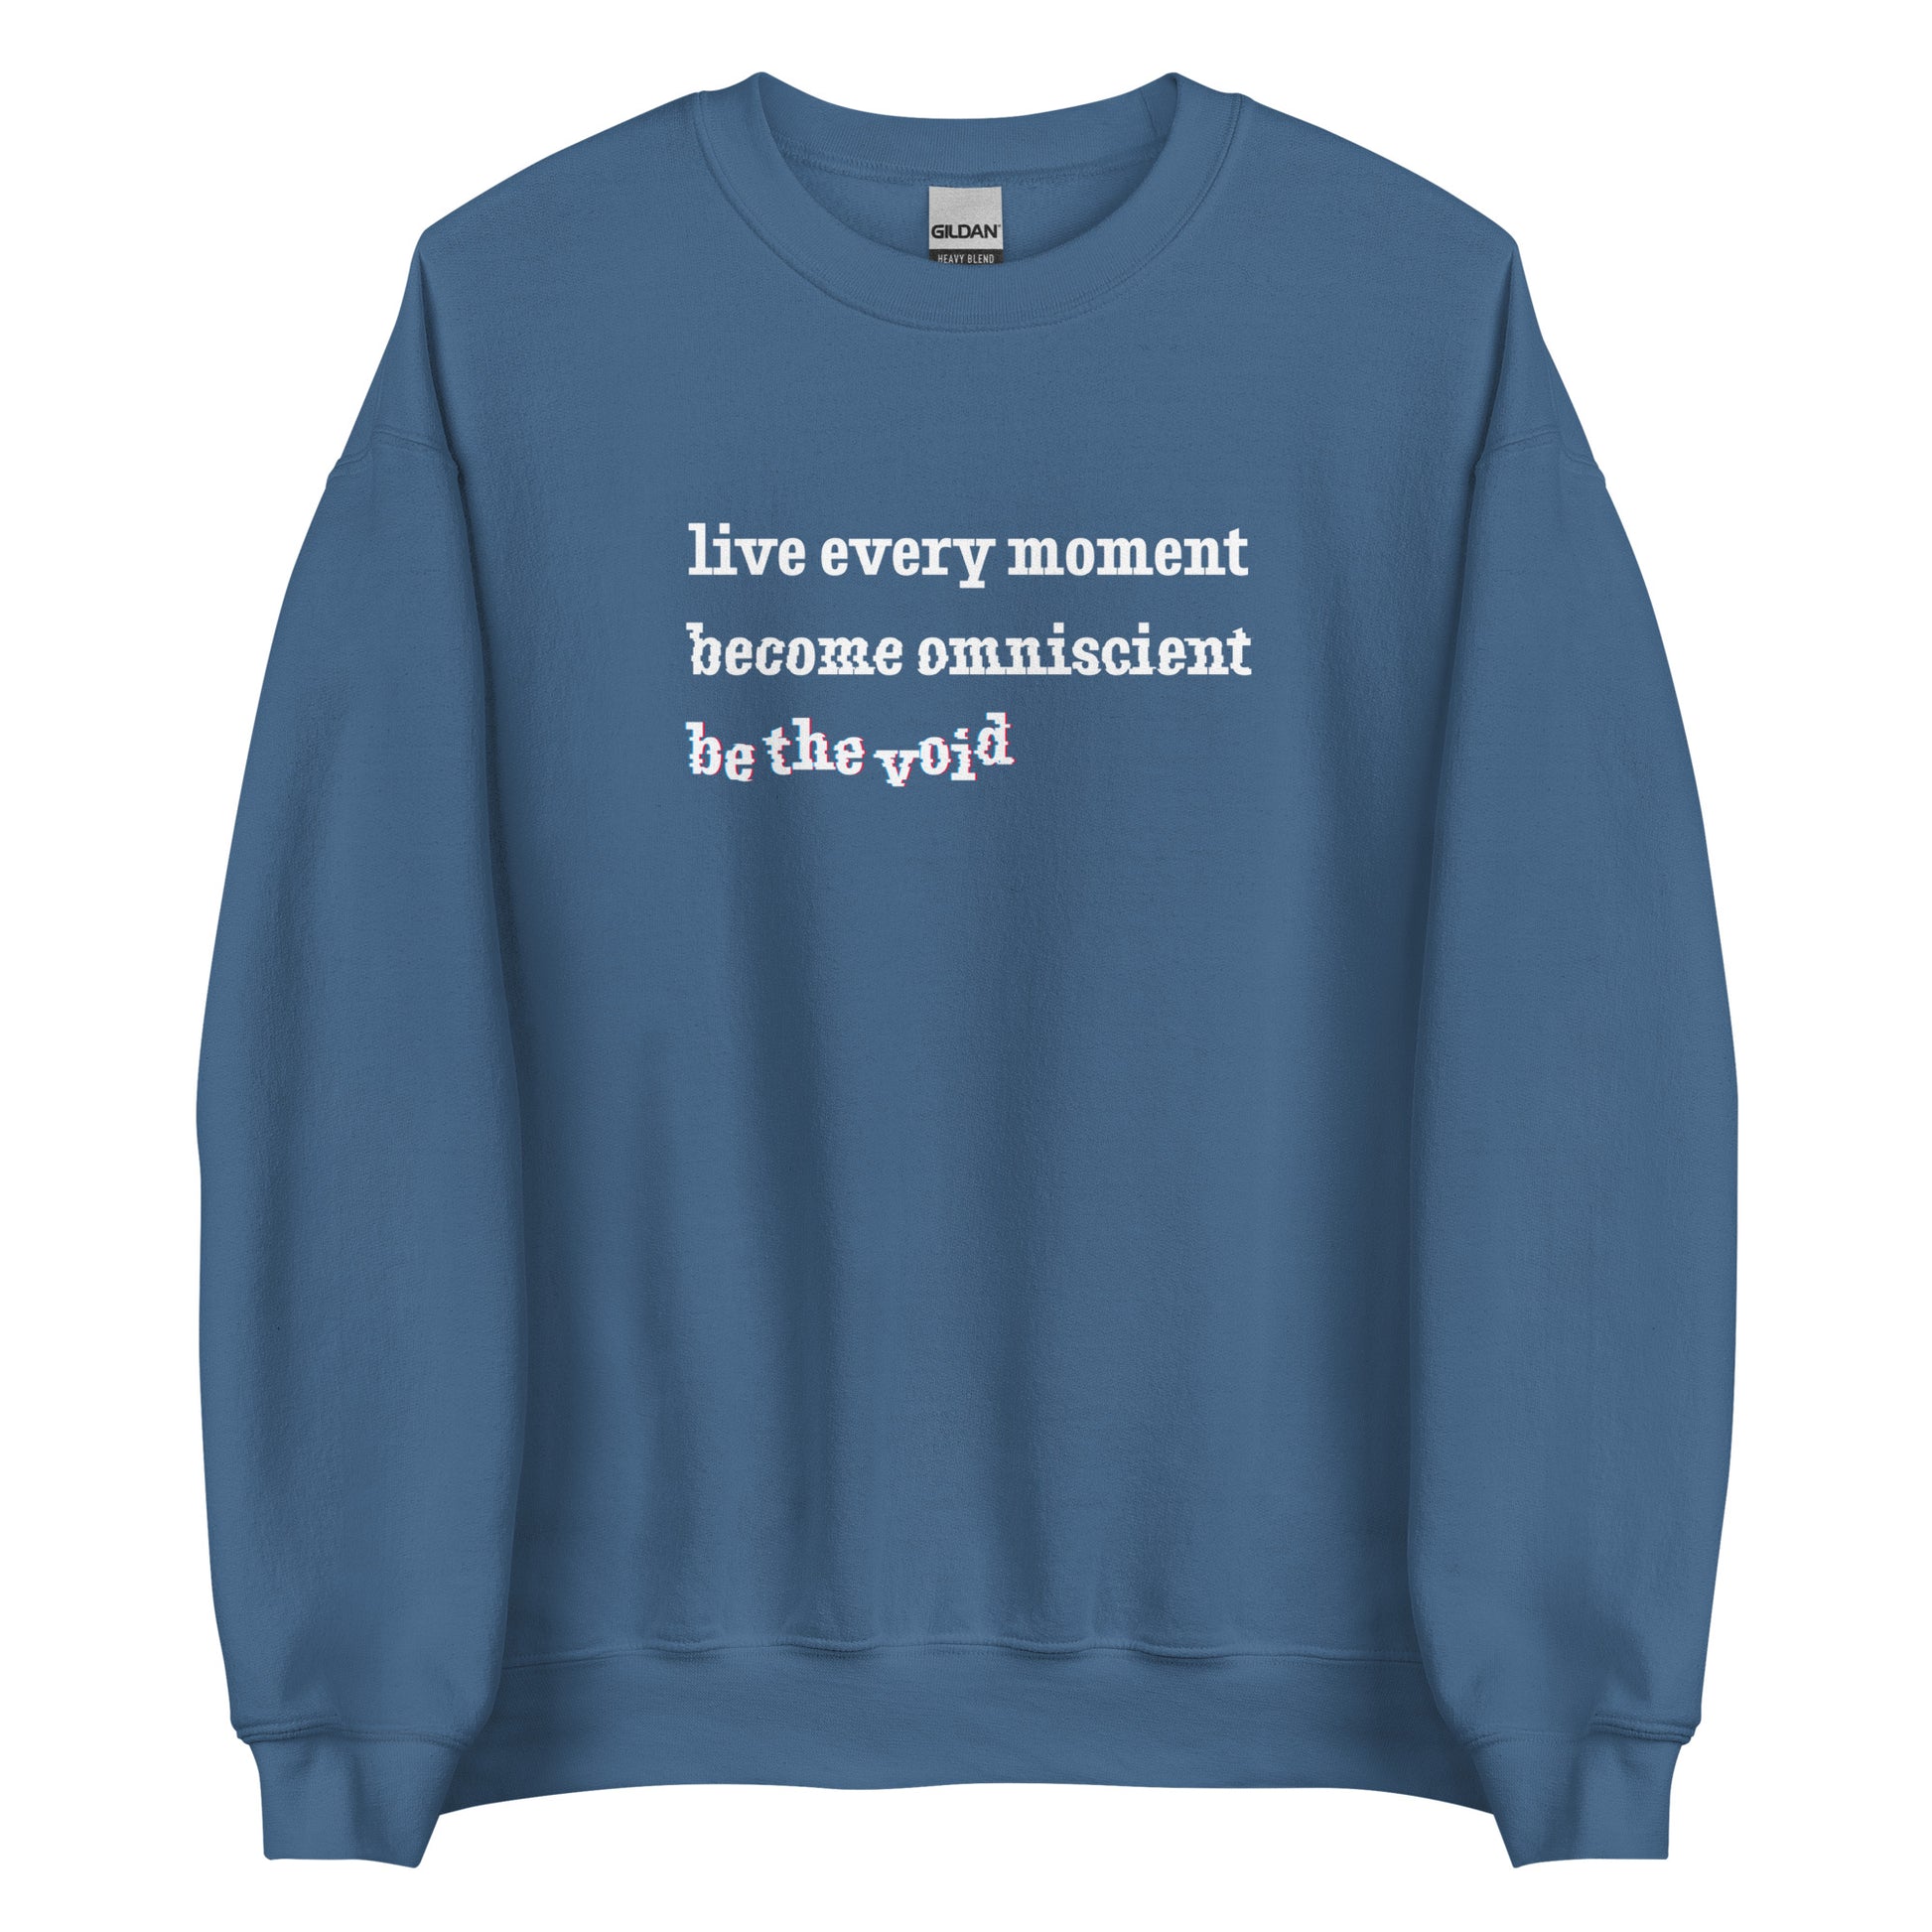 A blue crewneck sweatshirt featuring text reading "live every moment, become omniscient, be the void" in an increasingly distorted font.